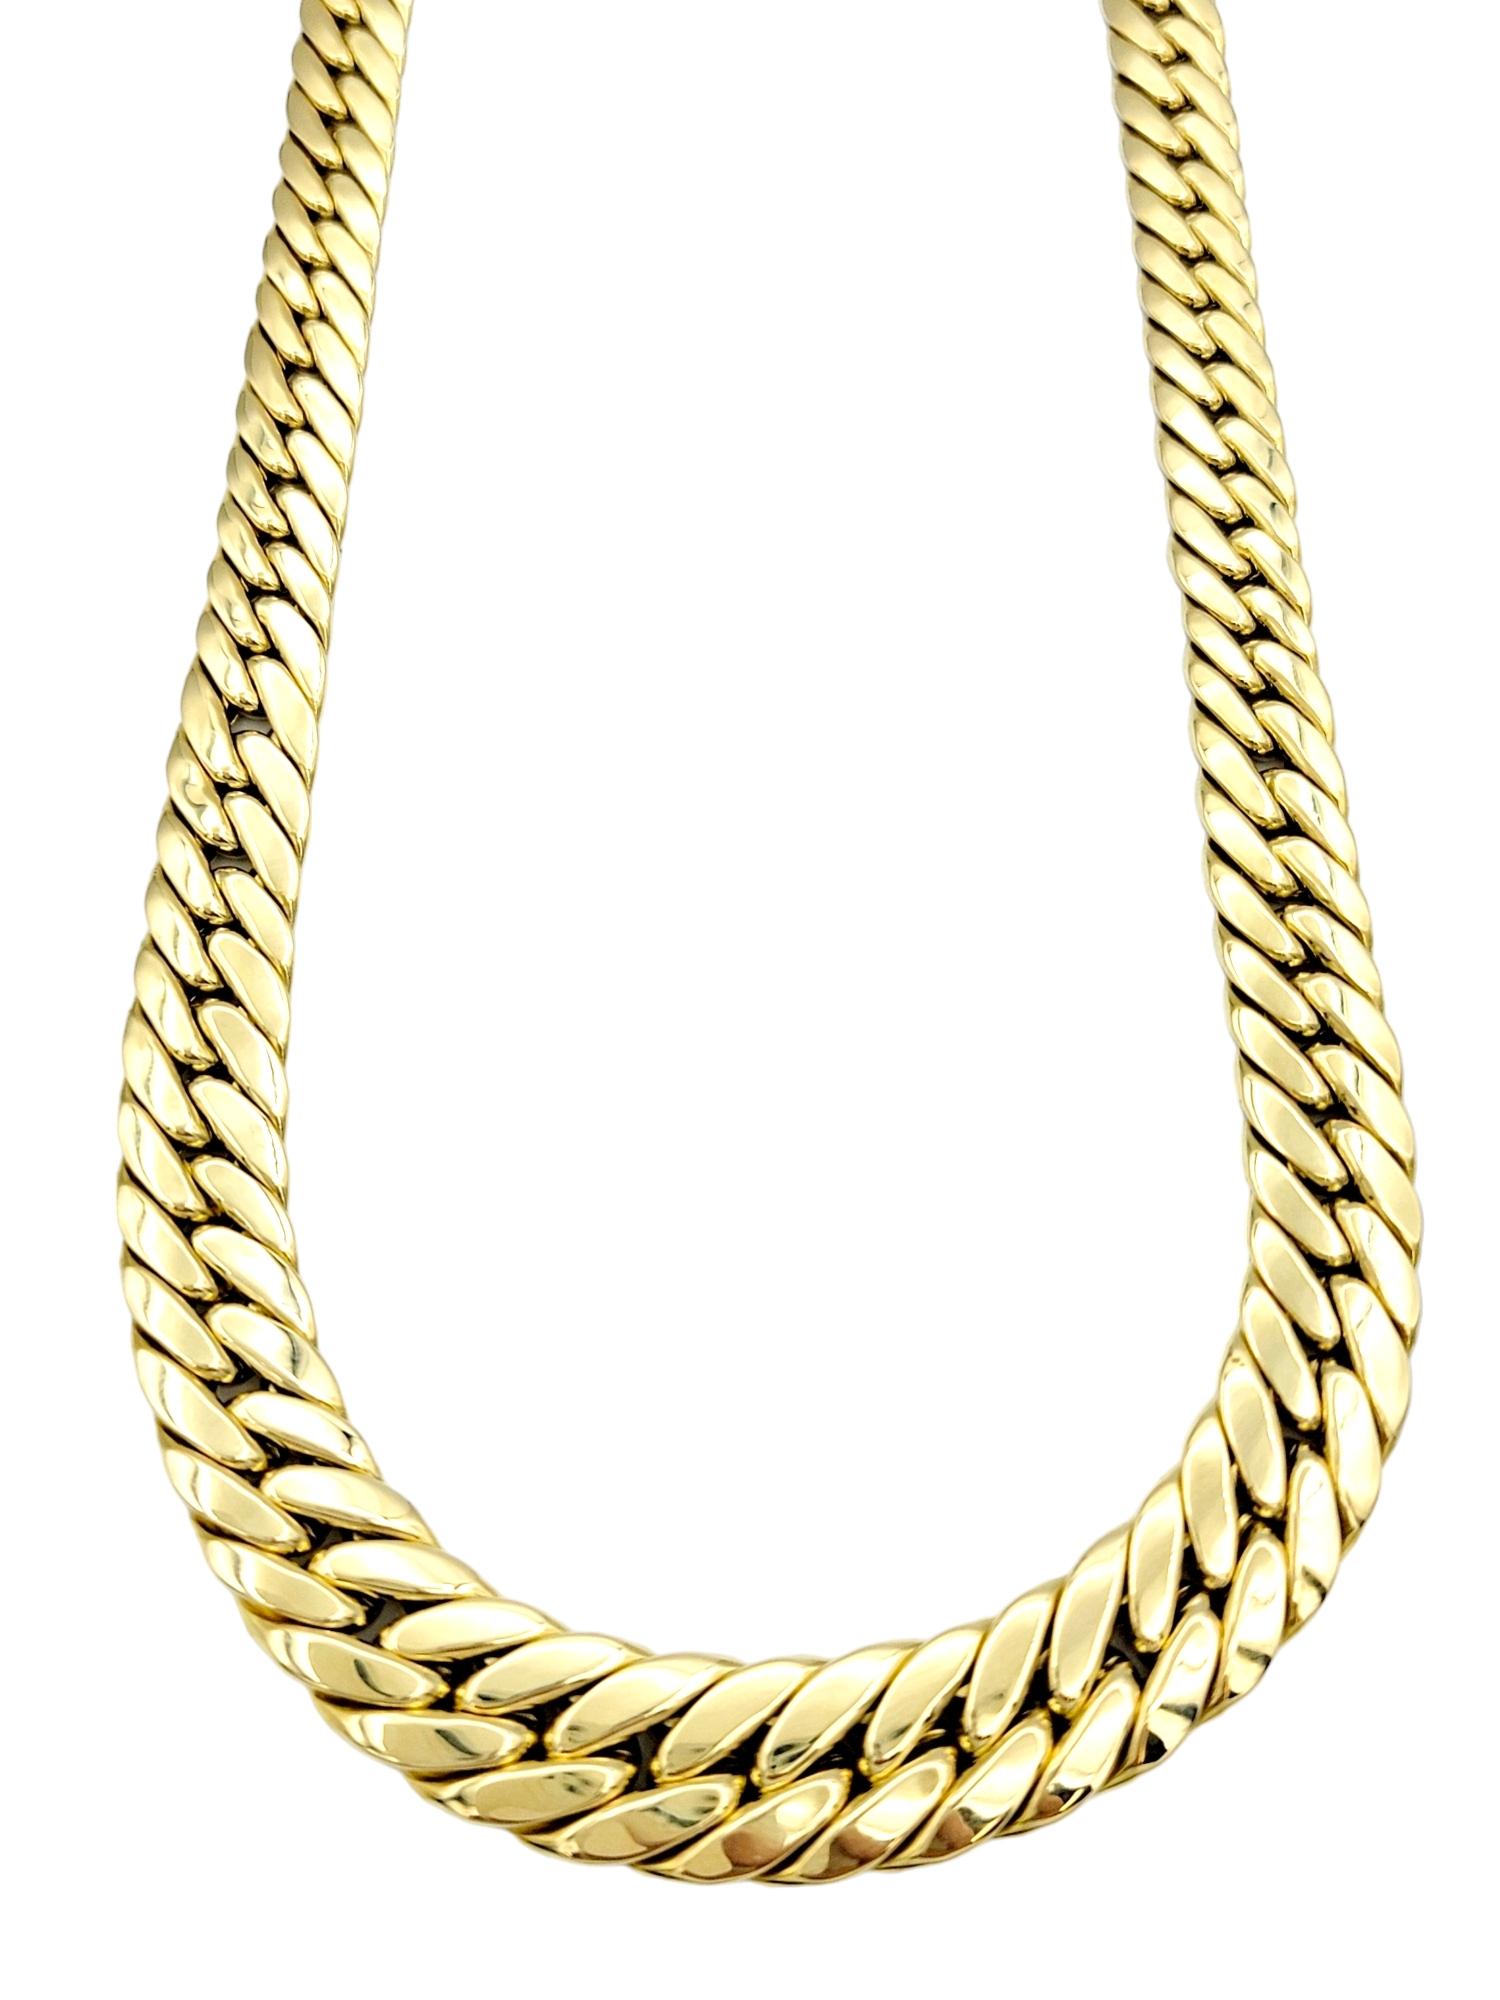 Chunky Graduated Curb Link Chain Necklace in Polished 18 Karat Yellow Gold In Good Condition For Sale In Scottsdale, AZ